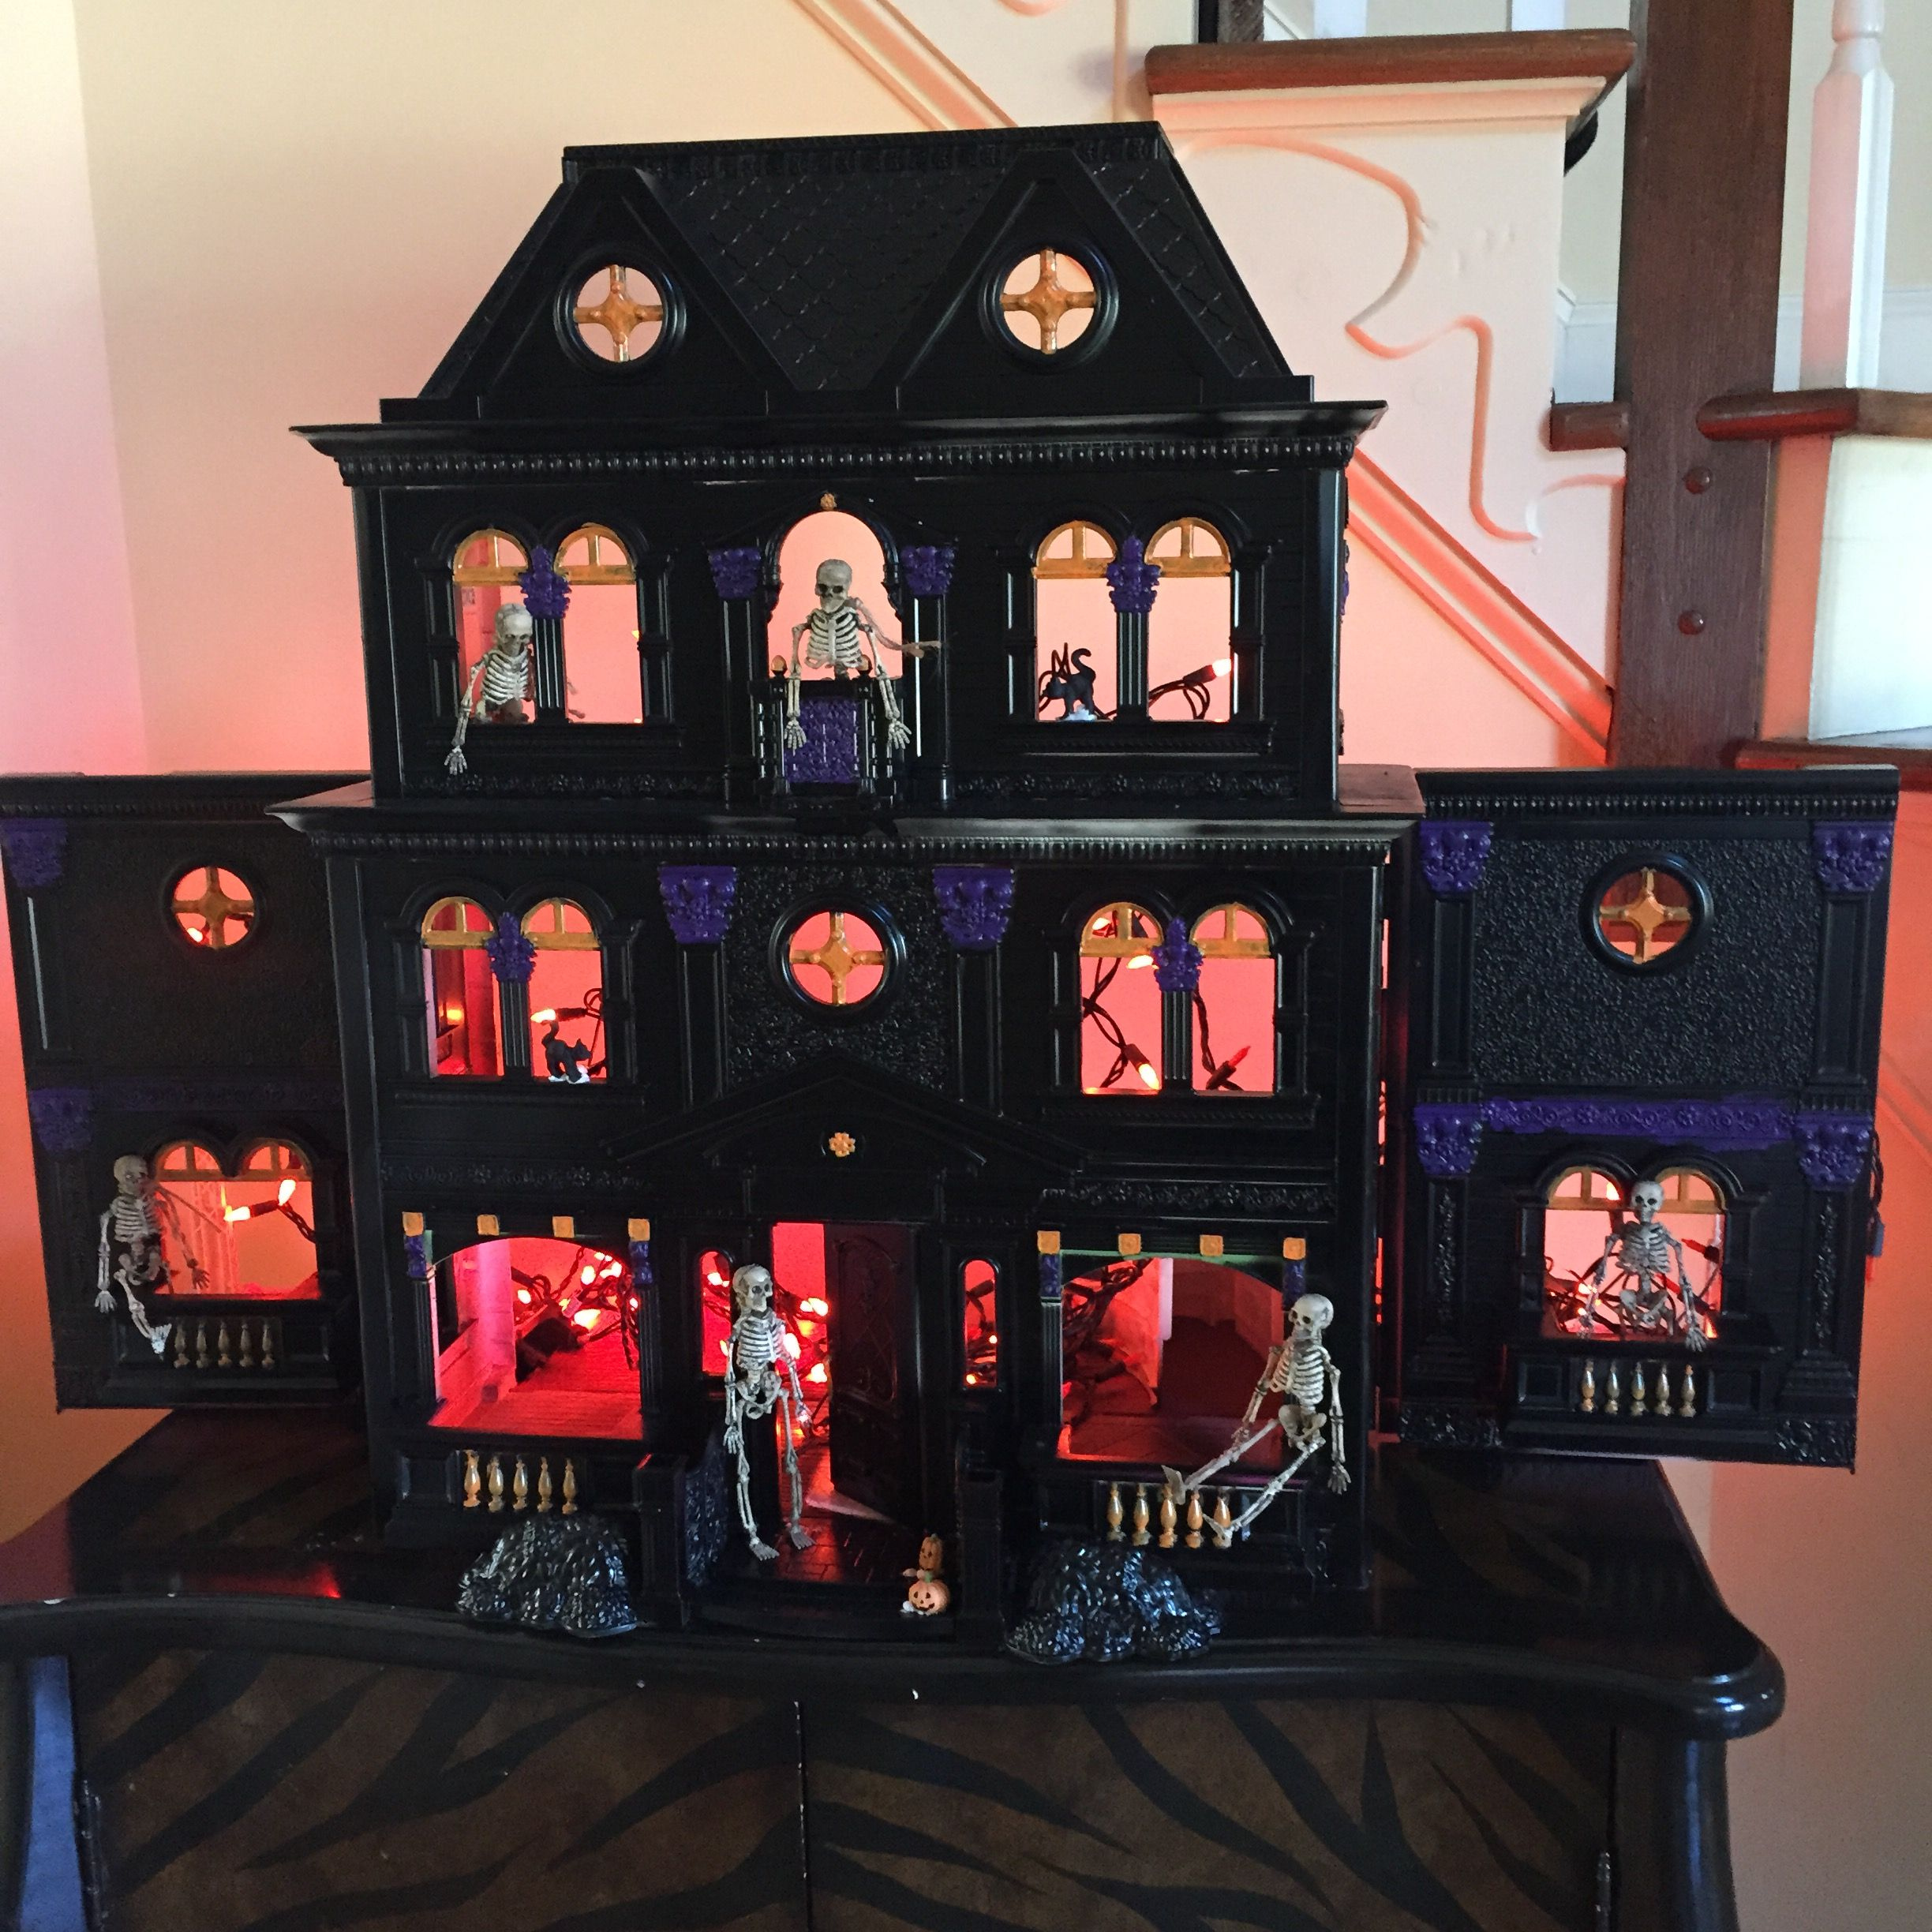 Getting My Halloween On With This Doll House I Painted Like A Haunted 